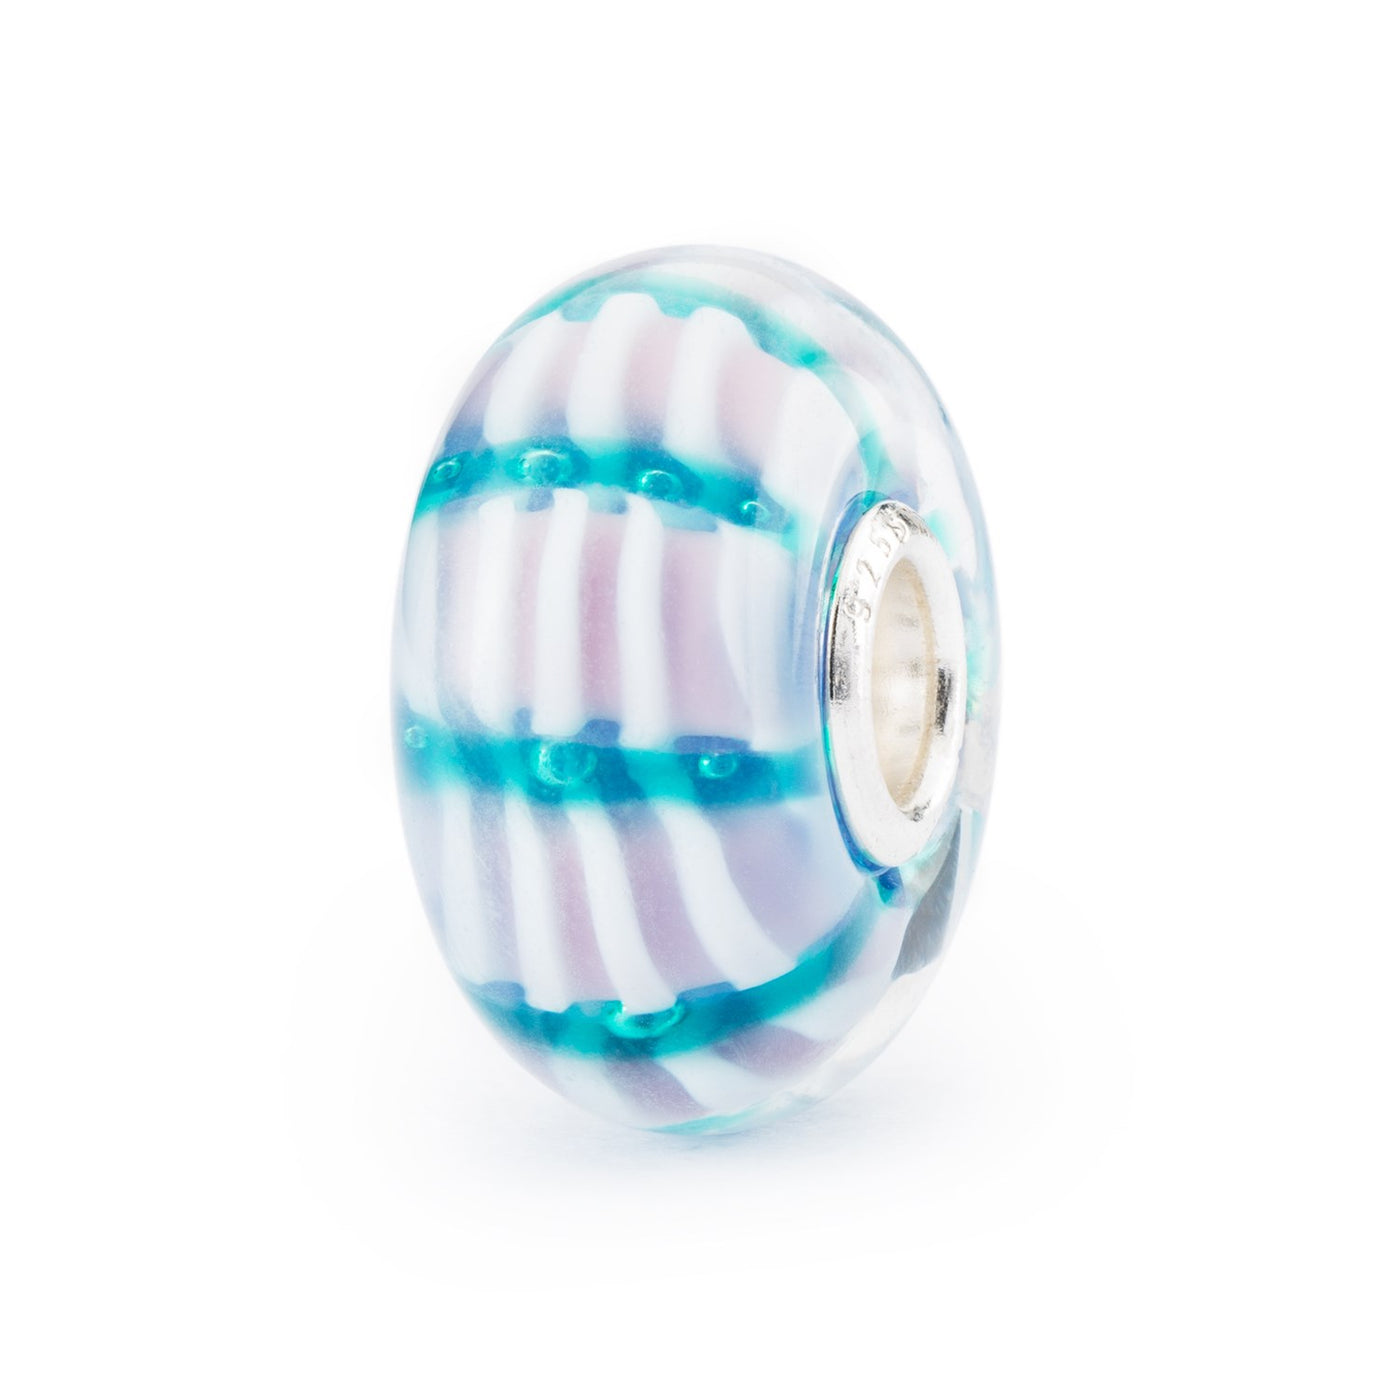 Charming glass bead with blue Blue bands with bobbles stretch across stripes in white and pale lilac inside.